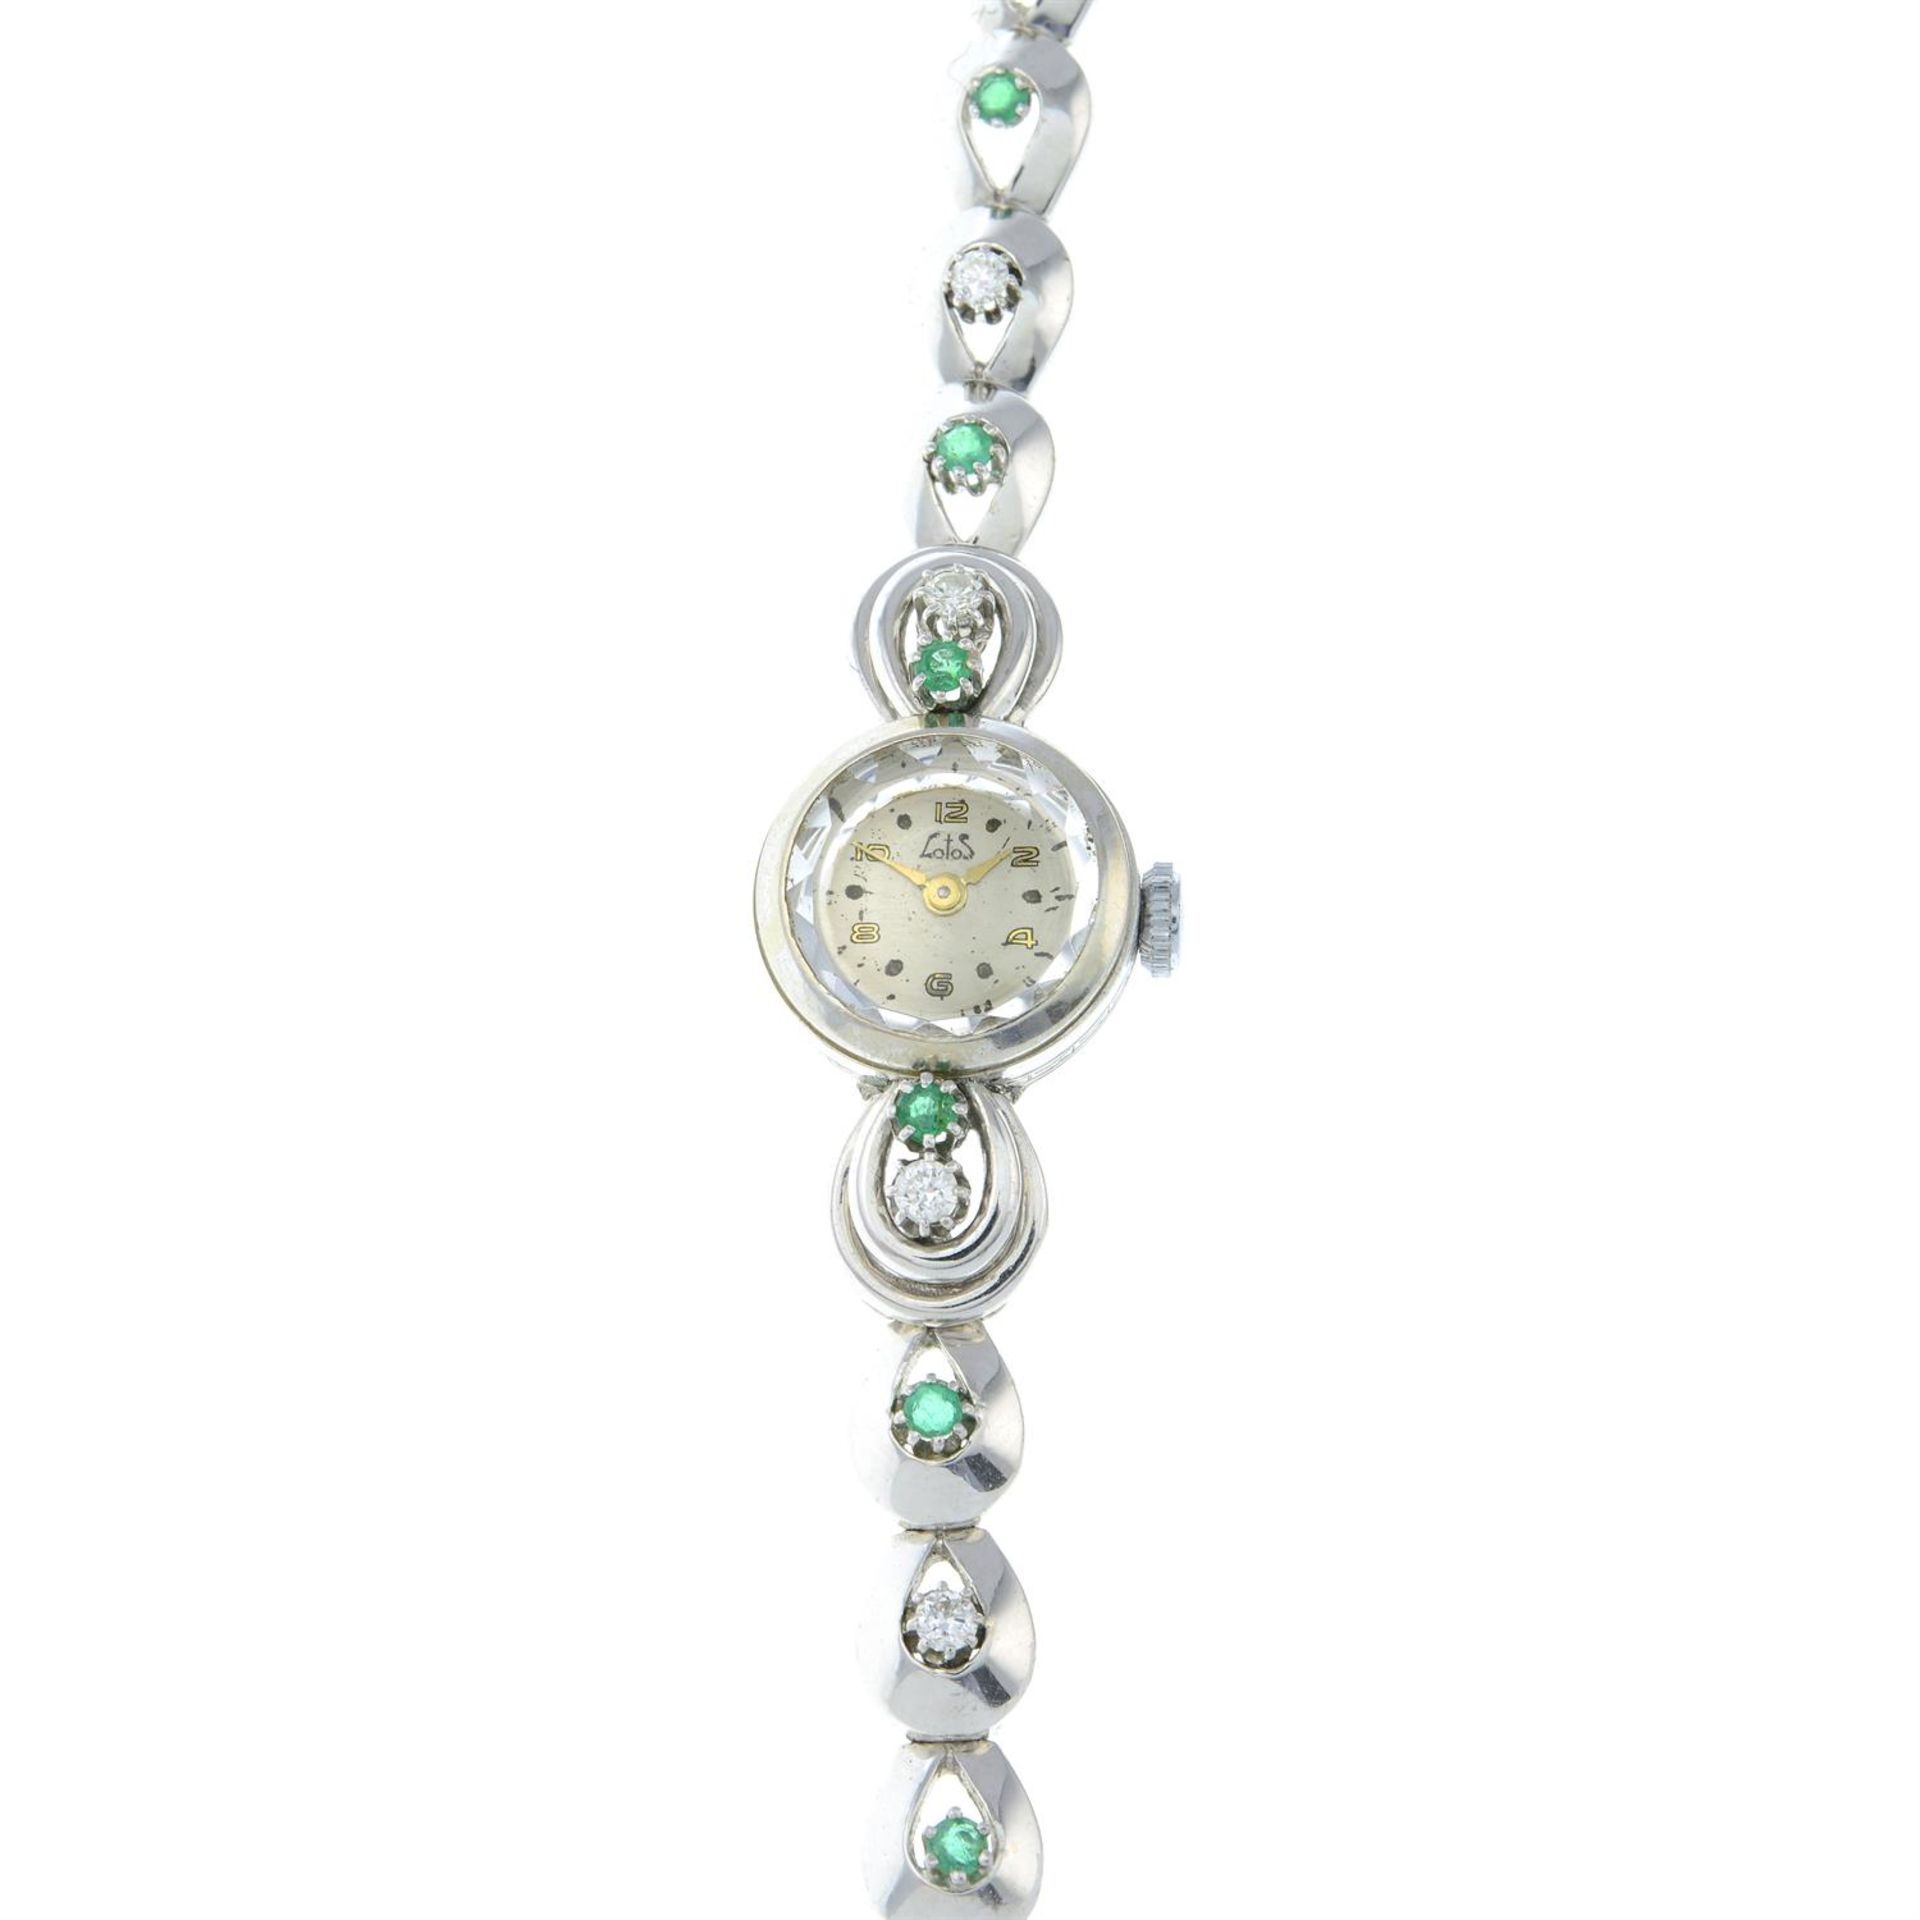 An emerald and brilliant-cut diamond cocktail watch, by Lotos.